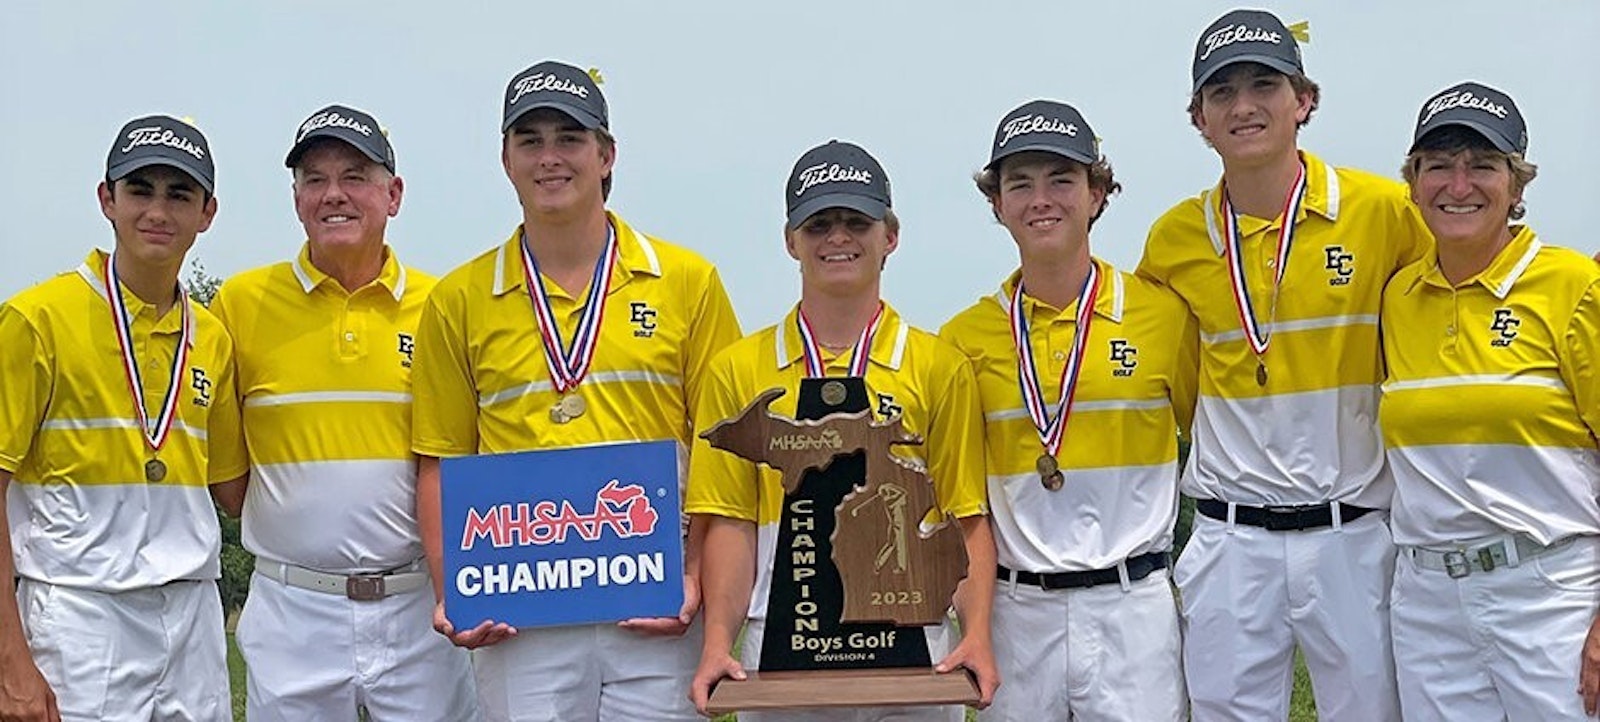 Everest Collegiate built a 17-stroke victory to claim the MHSAA Division 4 golf championship. It’s the third in school’s history along with wins in 2017 and 2018. The lineup included Franco Torio (left), coach Dave Smith, Remy Stalcup, Parker Stalcup, Will Pennanen, Jimmy Schmitt, and assistant coach Ann Serra-Lowney. (Photo courtesy of Everest Collegiate)